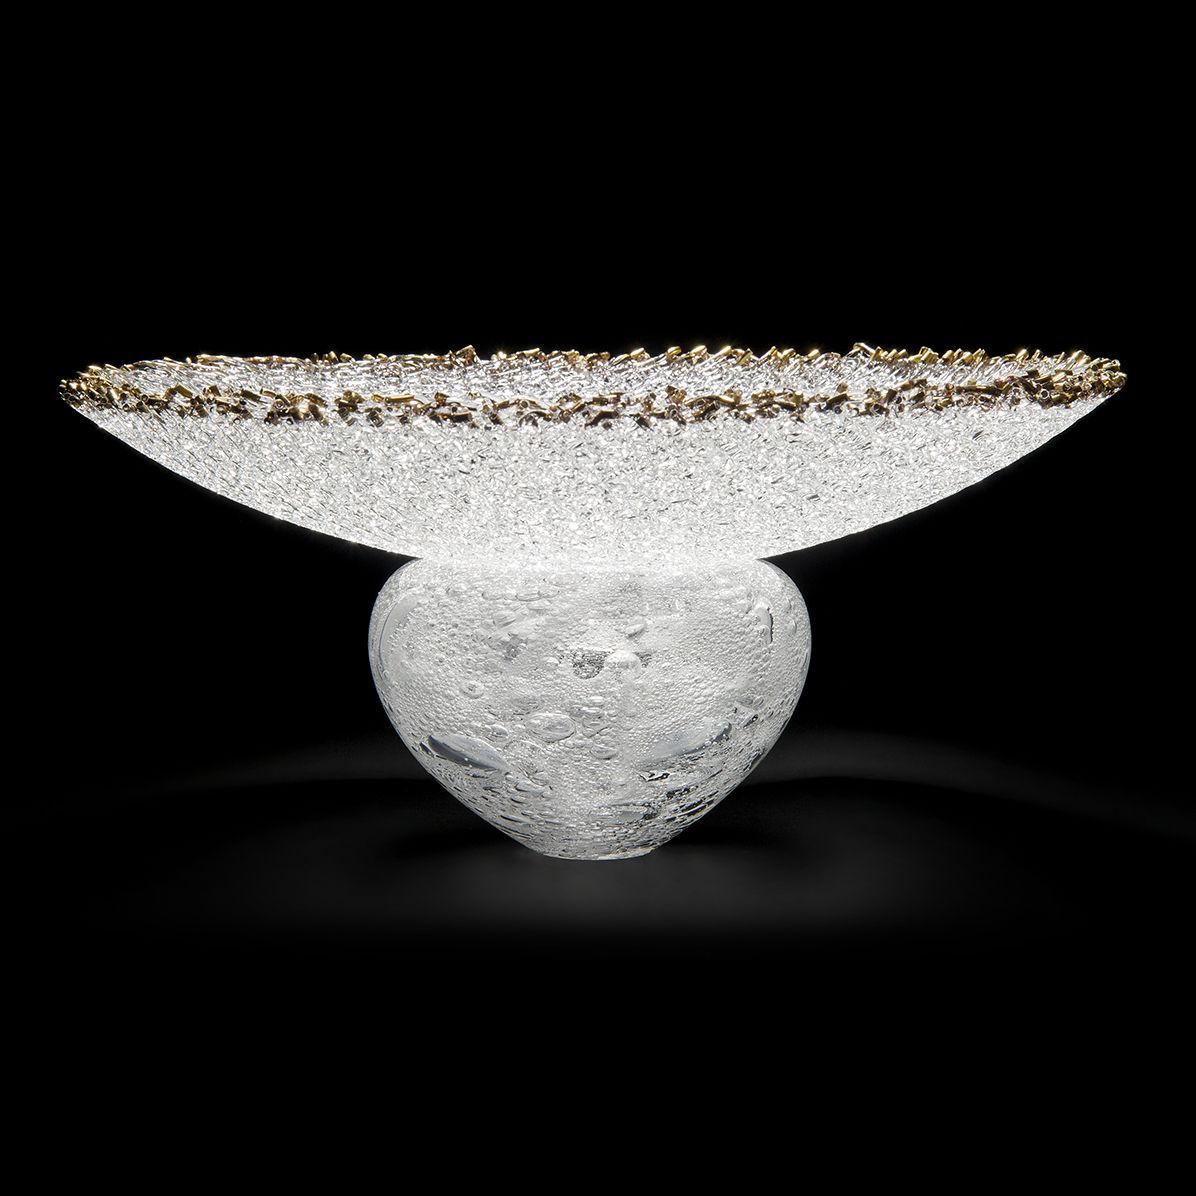 Woven Chalice, a Unique clear Glass Centrepiece / Sculpture by Cathryn Shilling 1